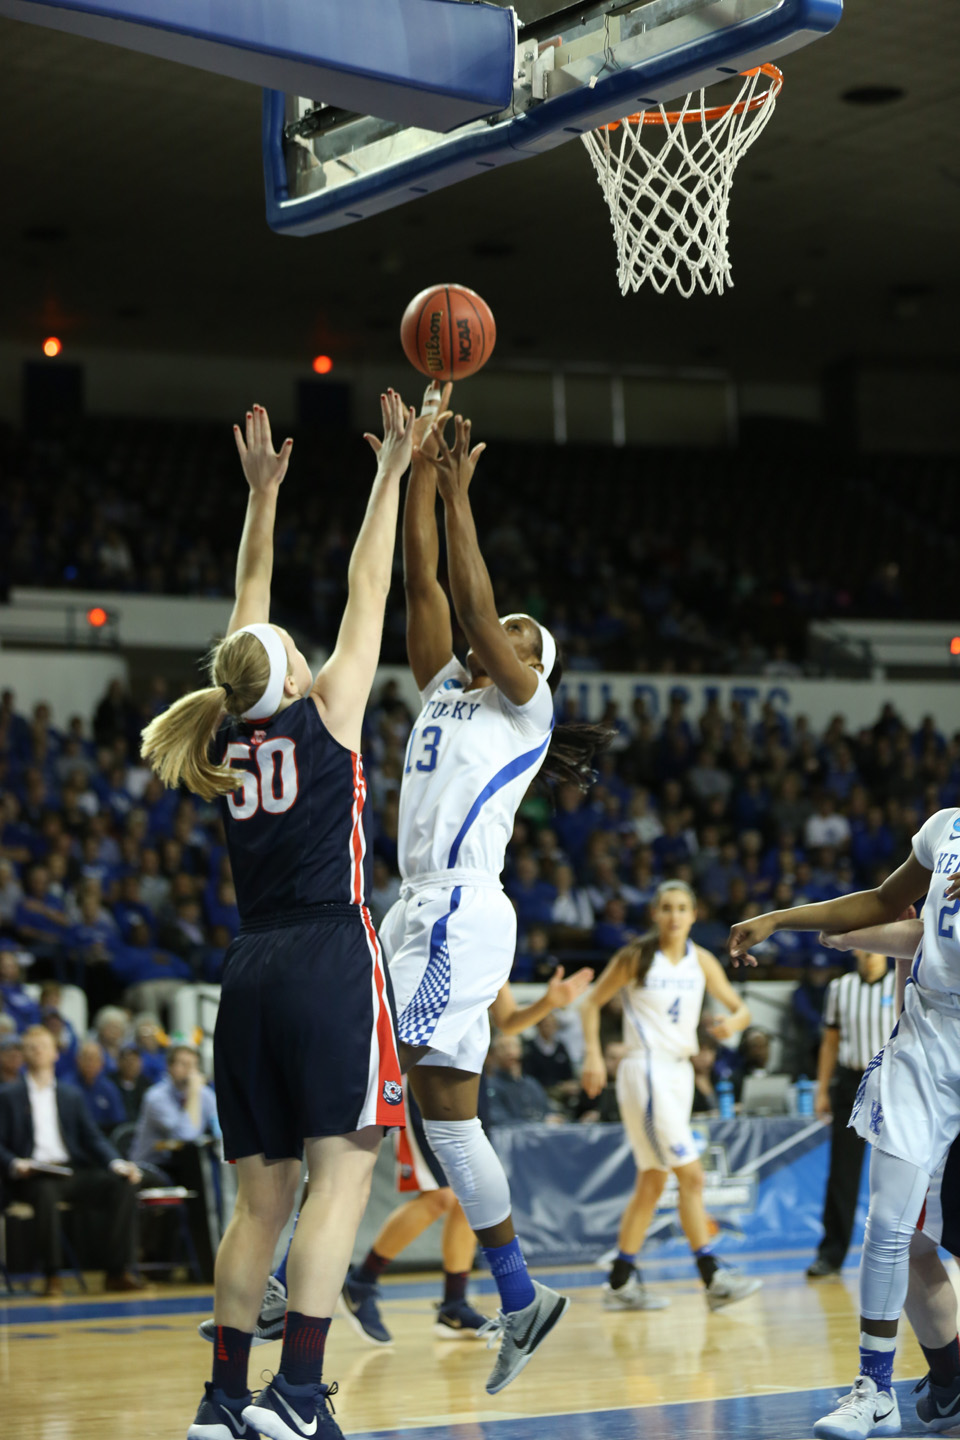 UK defeats Belmont in opening round - Photo by Teresa Fraley